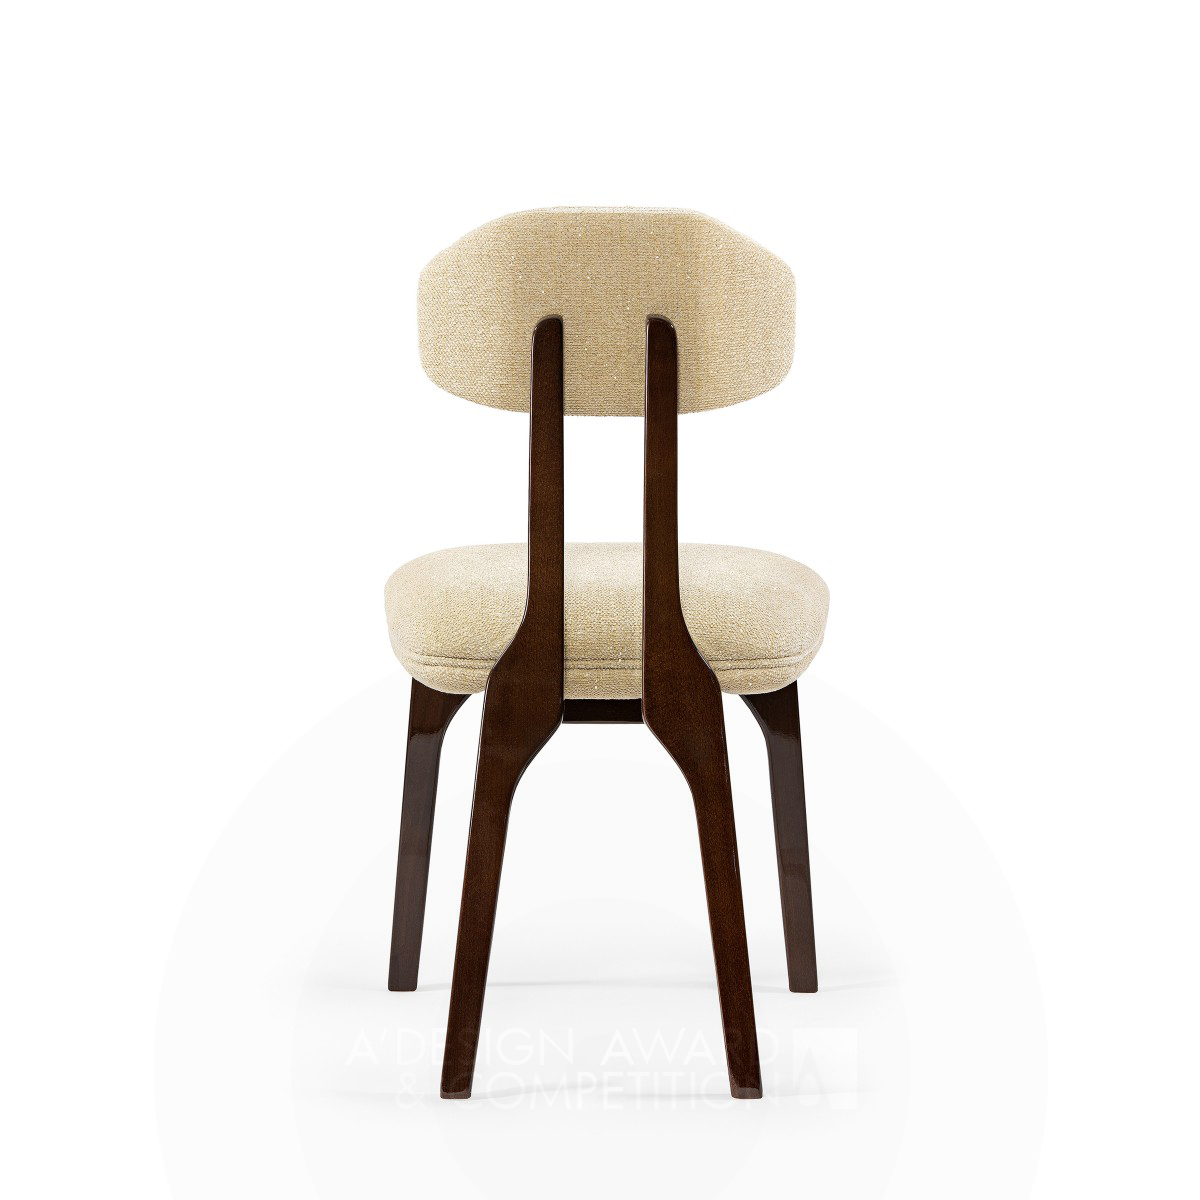 Silhouette Dining Chair by Joana Santos Barbosa